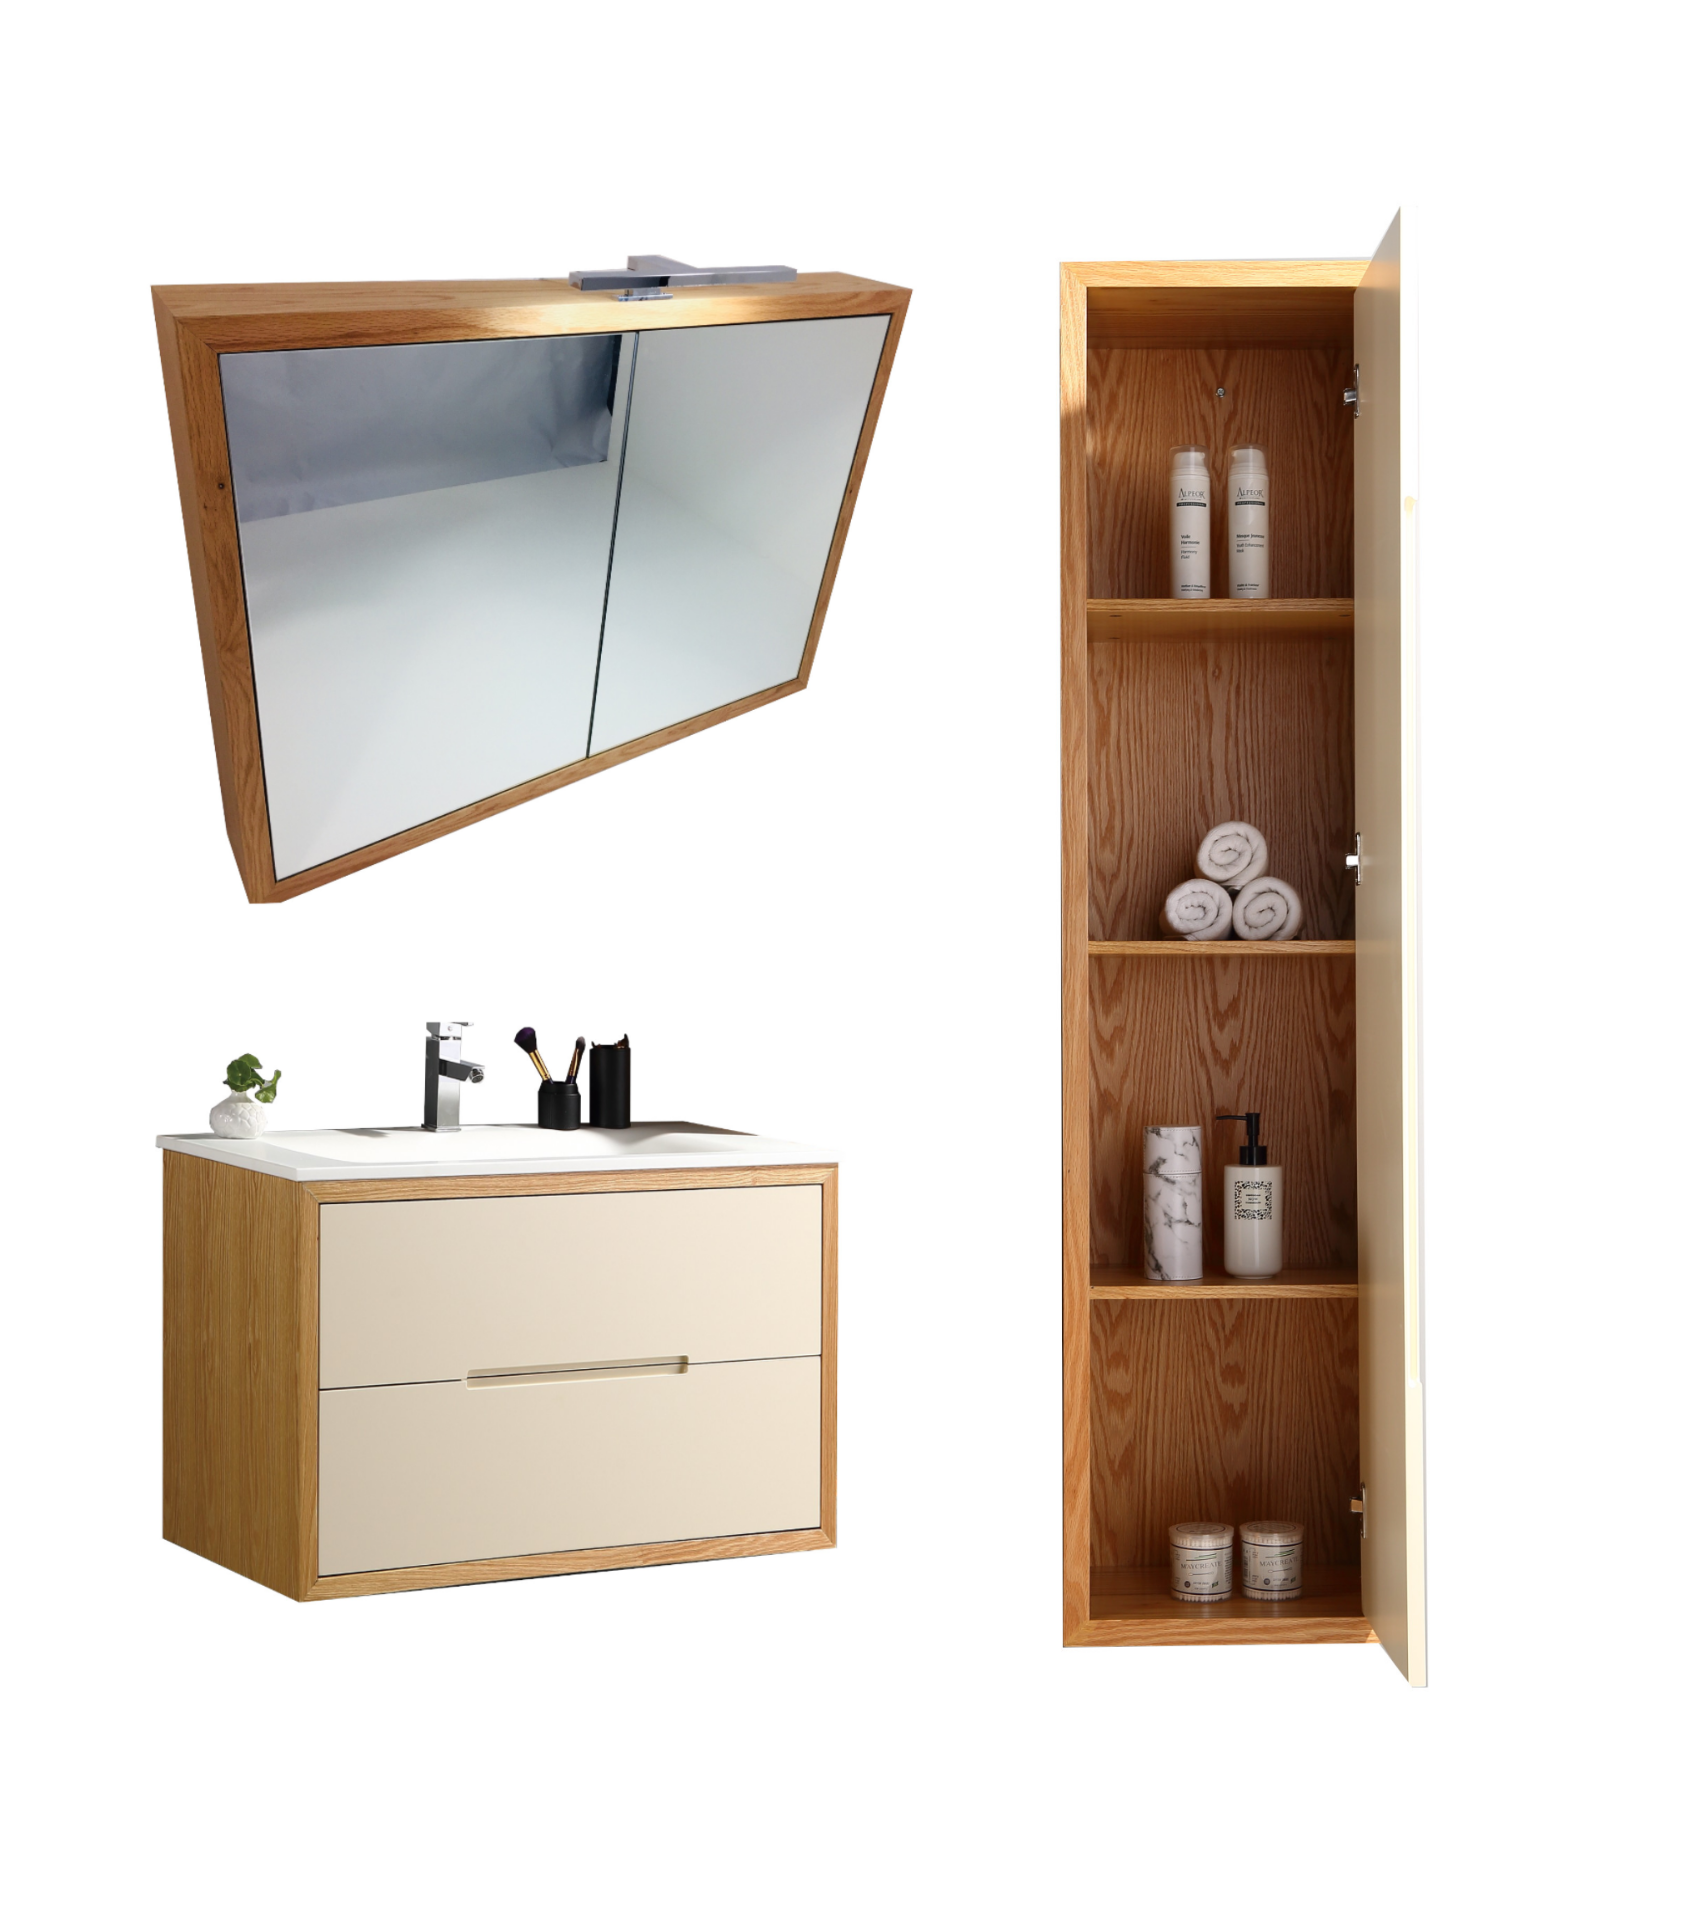 Complete Vanity Unit Set in Beige with fixtures and fittings RRP £799.99 *NO VAT* - Image 5 of 5